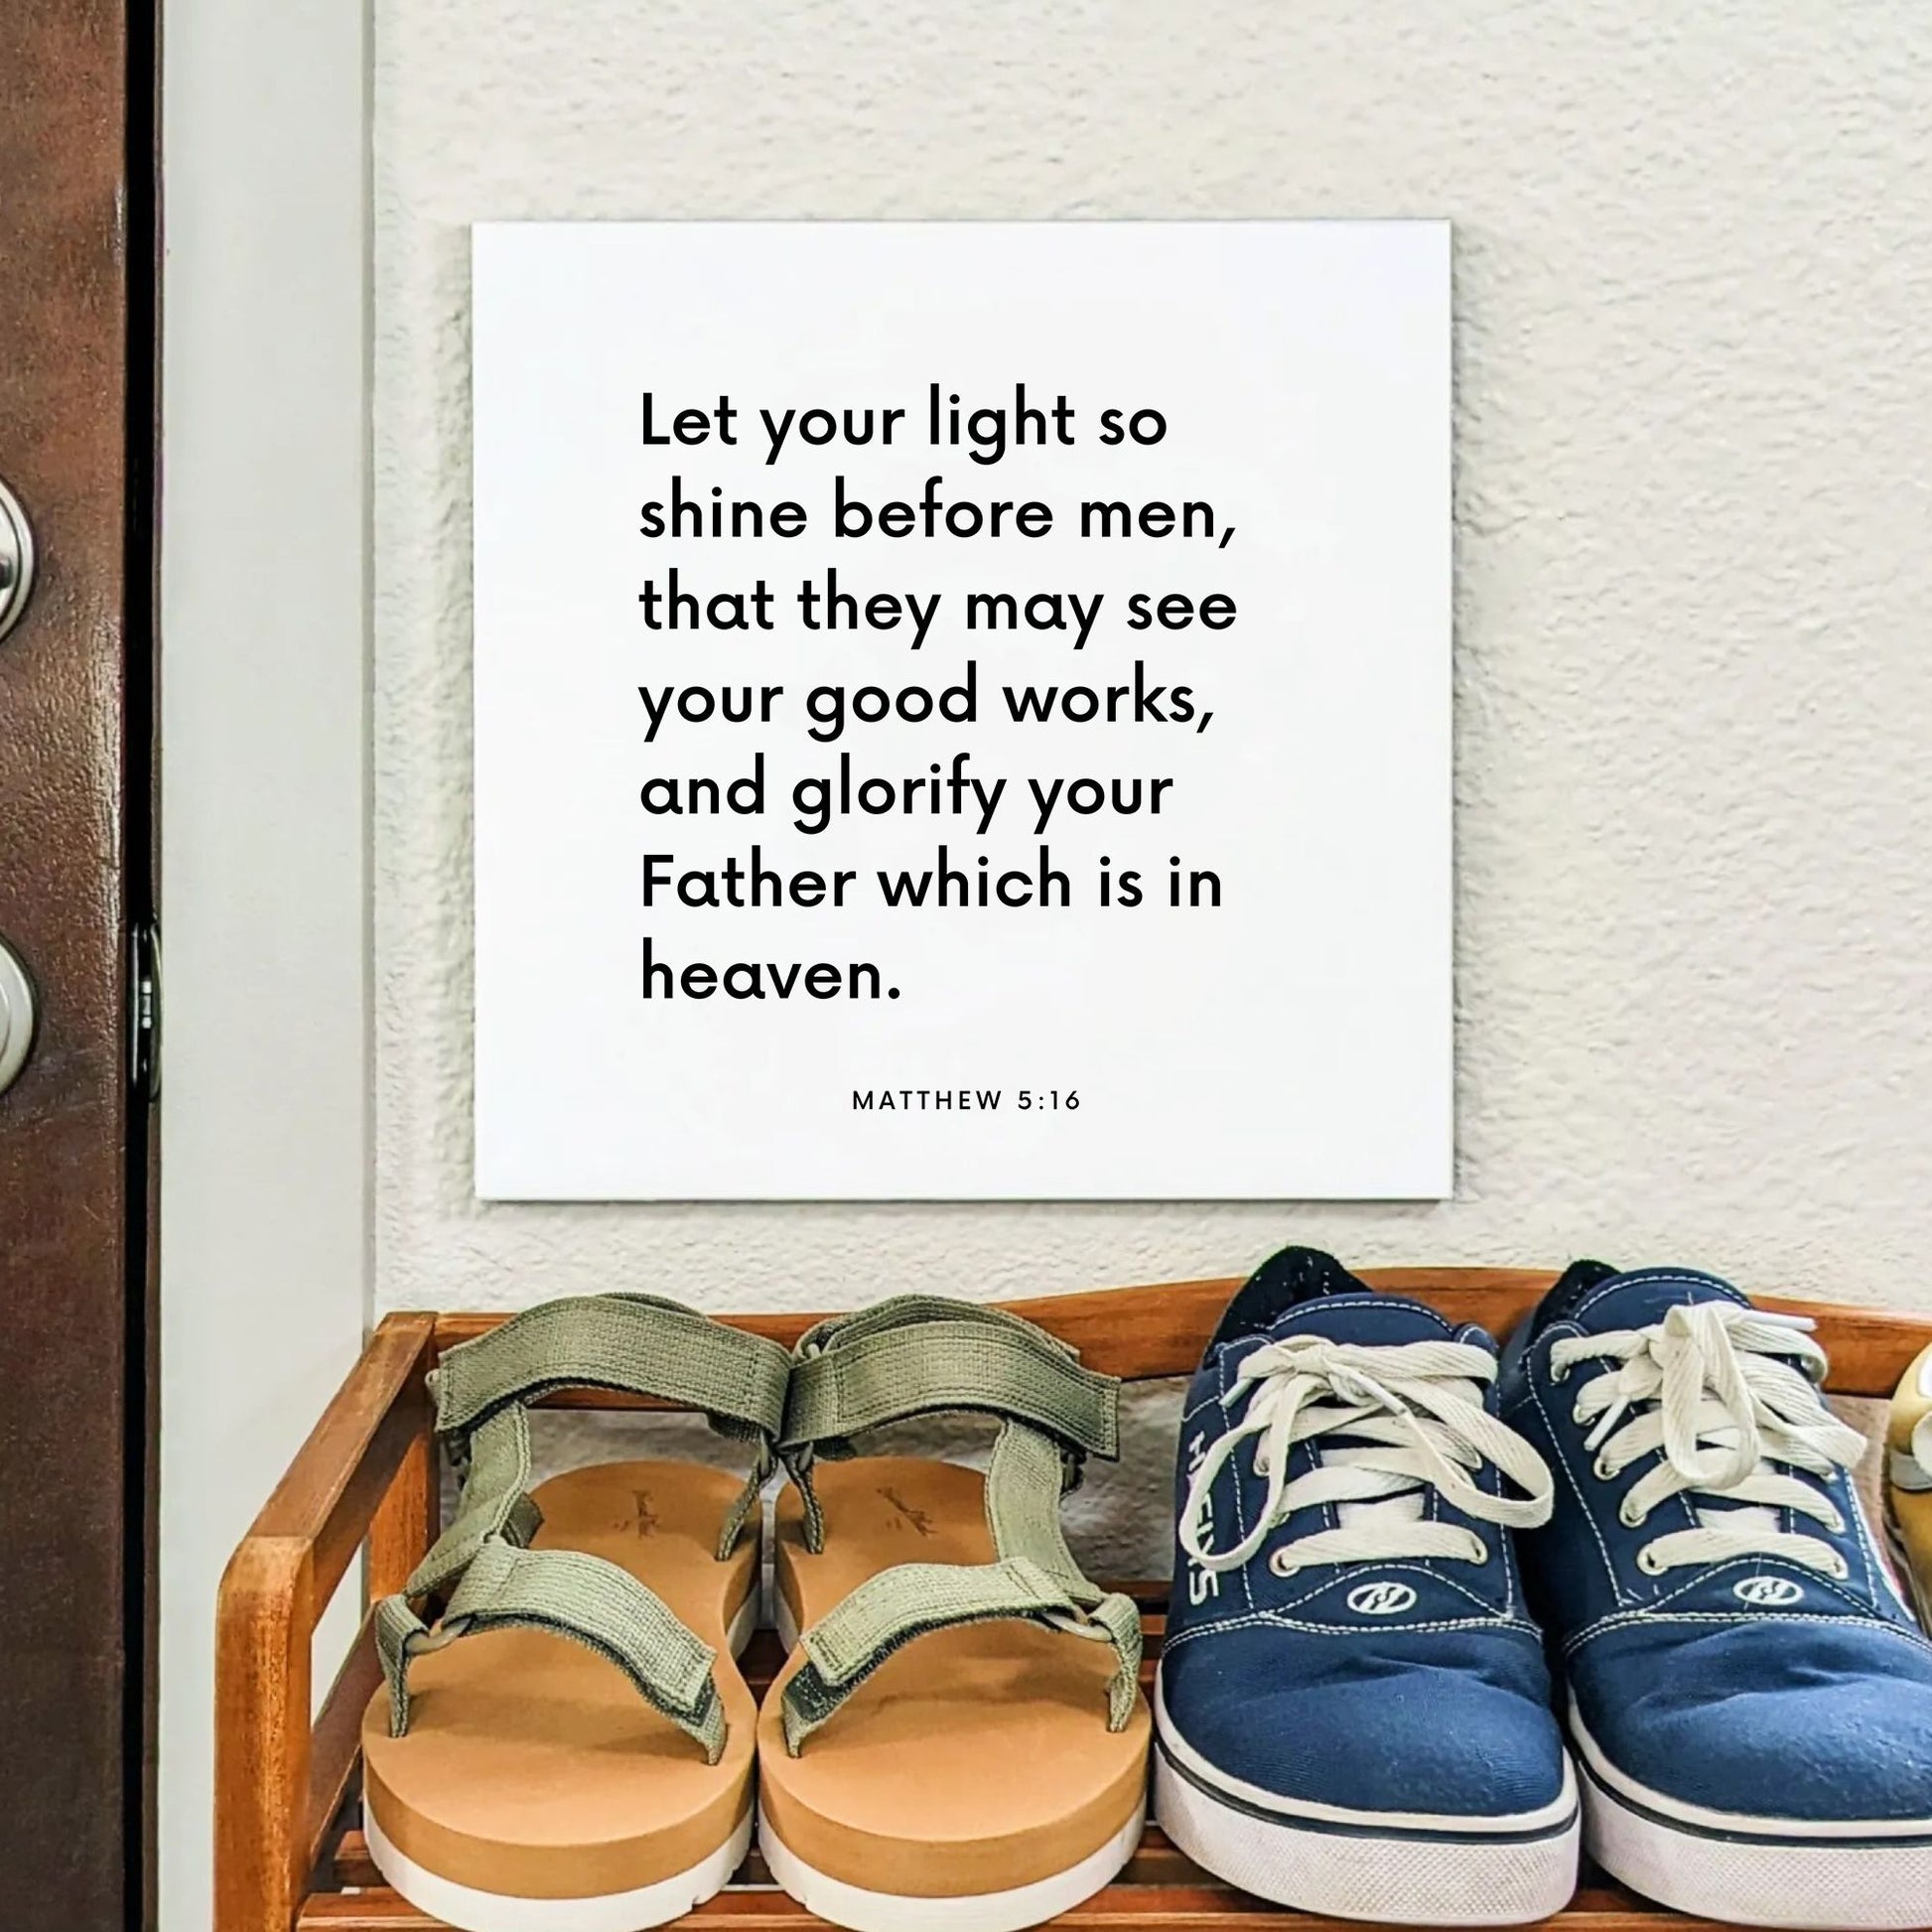 Shoes mouting of the scripture tile for Matthew 5:16 - "Let your light so shine before men"